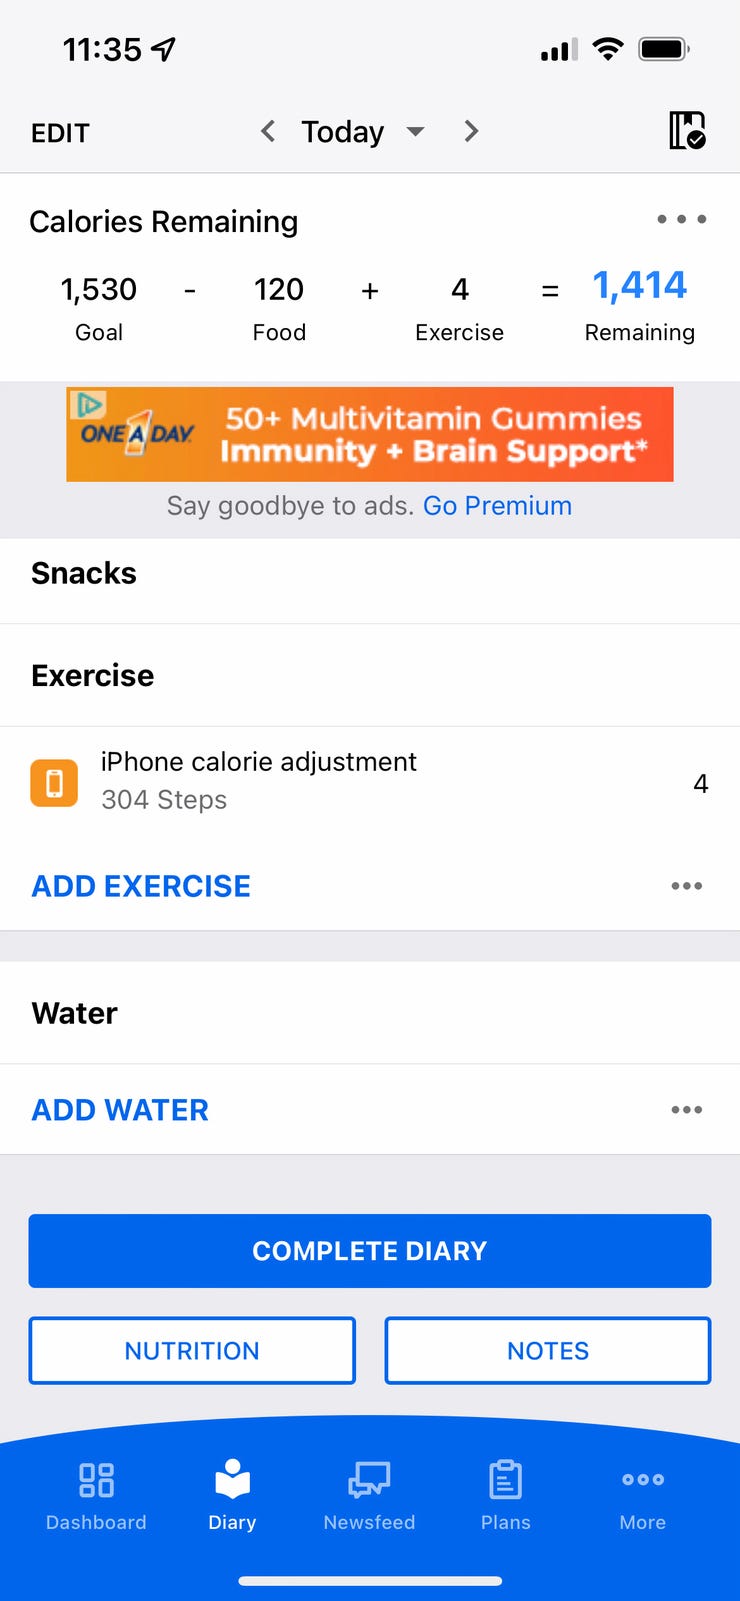 My Fitness Pal: Key Features & Pricing